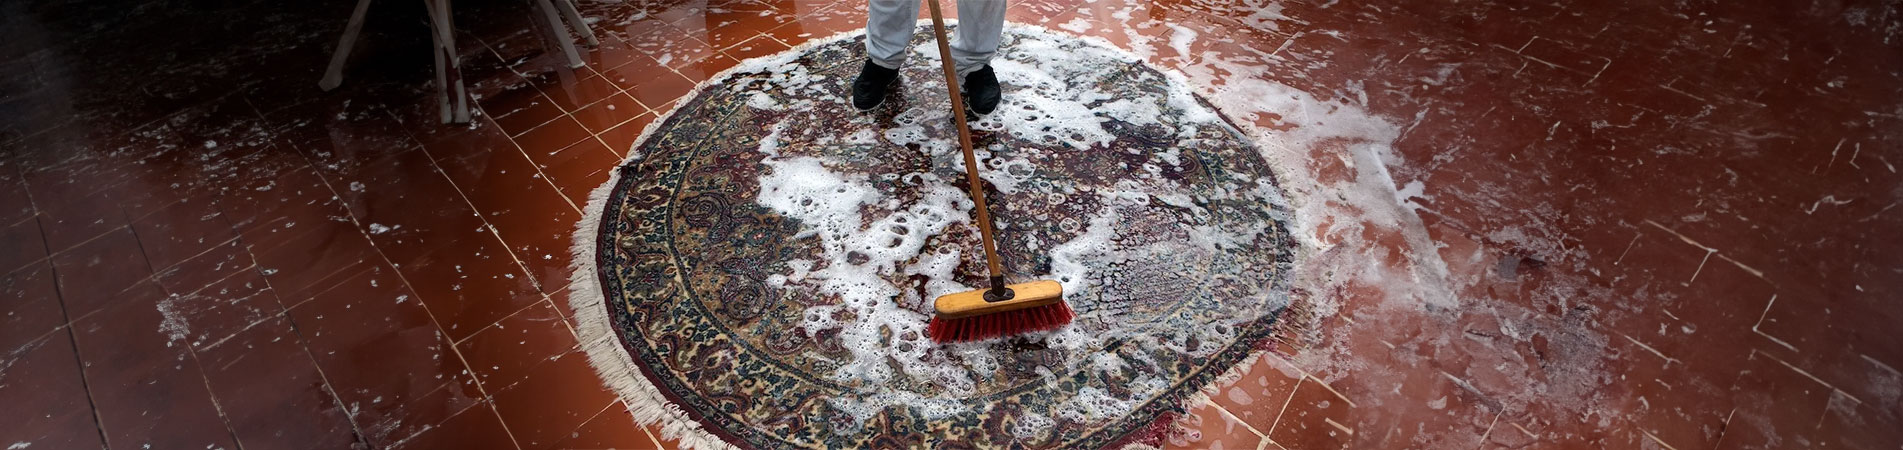 Rug Cleaning